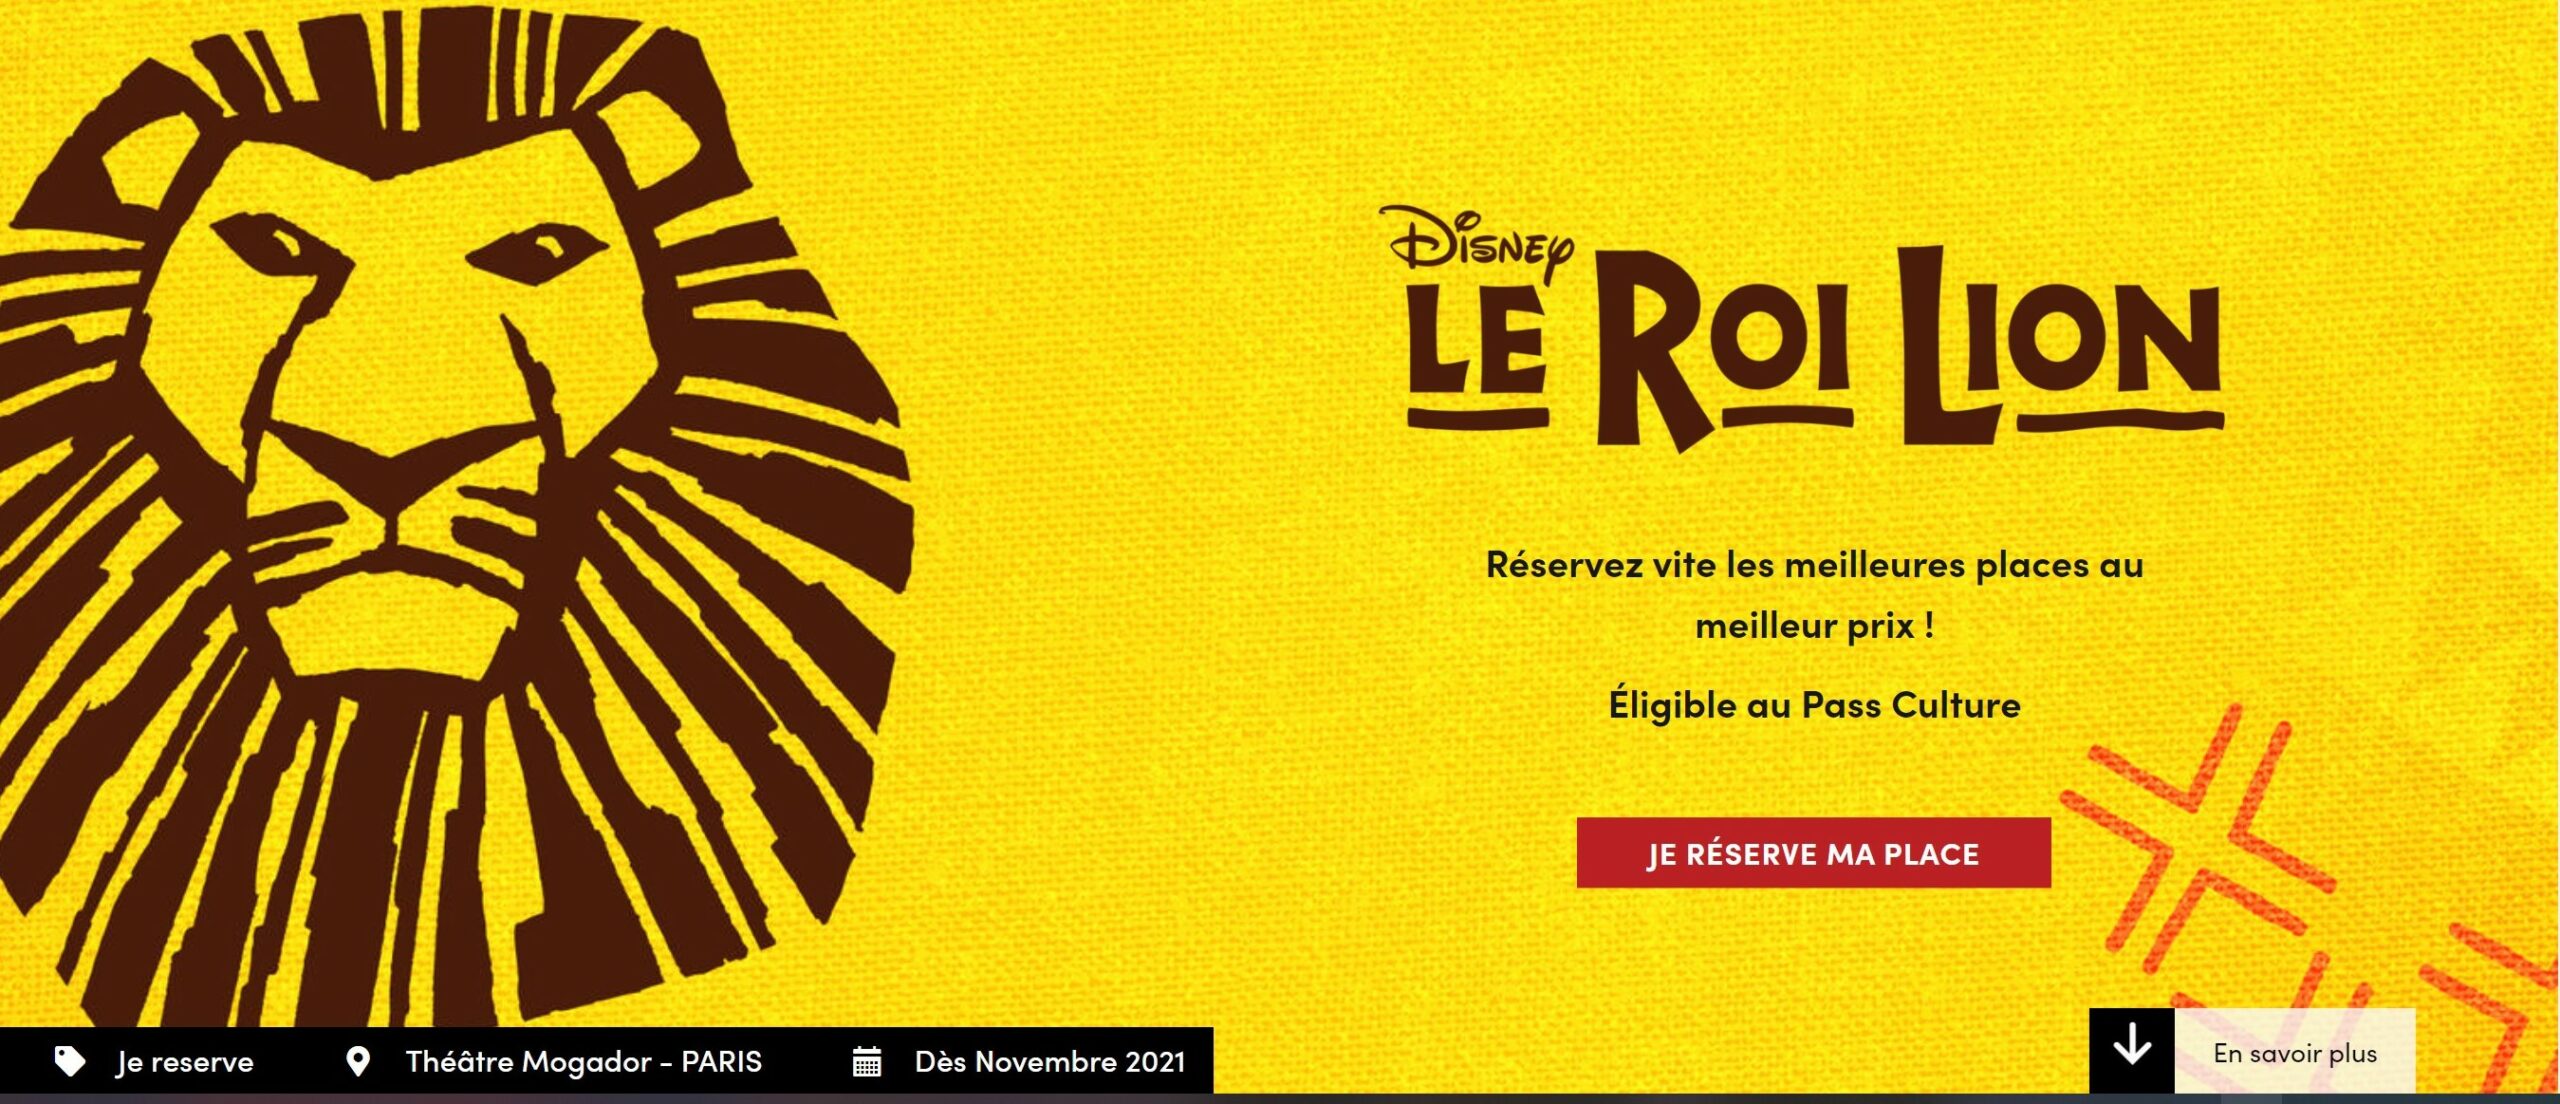 Featured image for “Le Roi Lion”